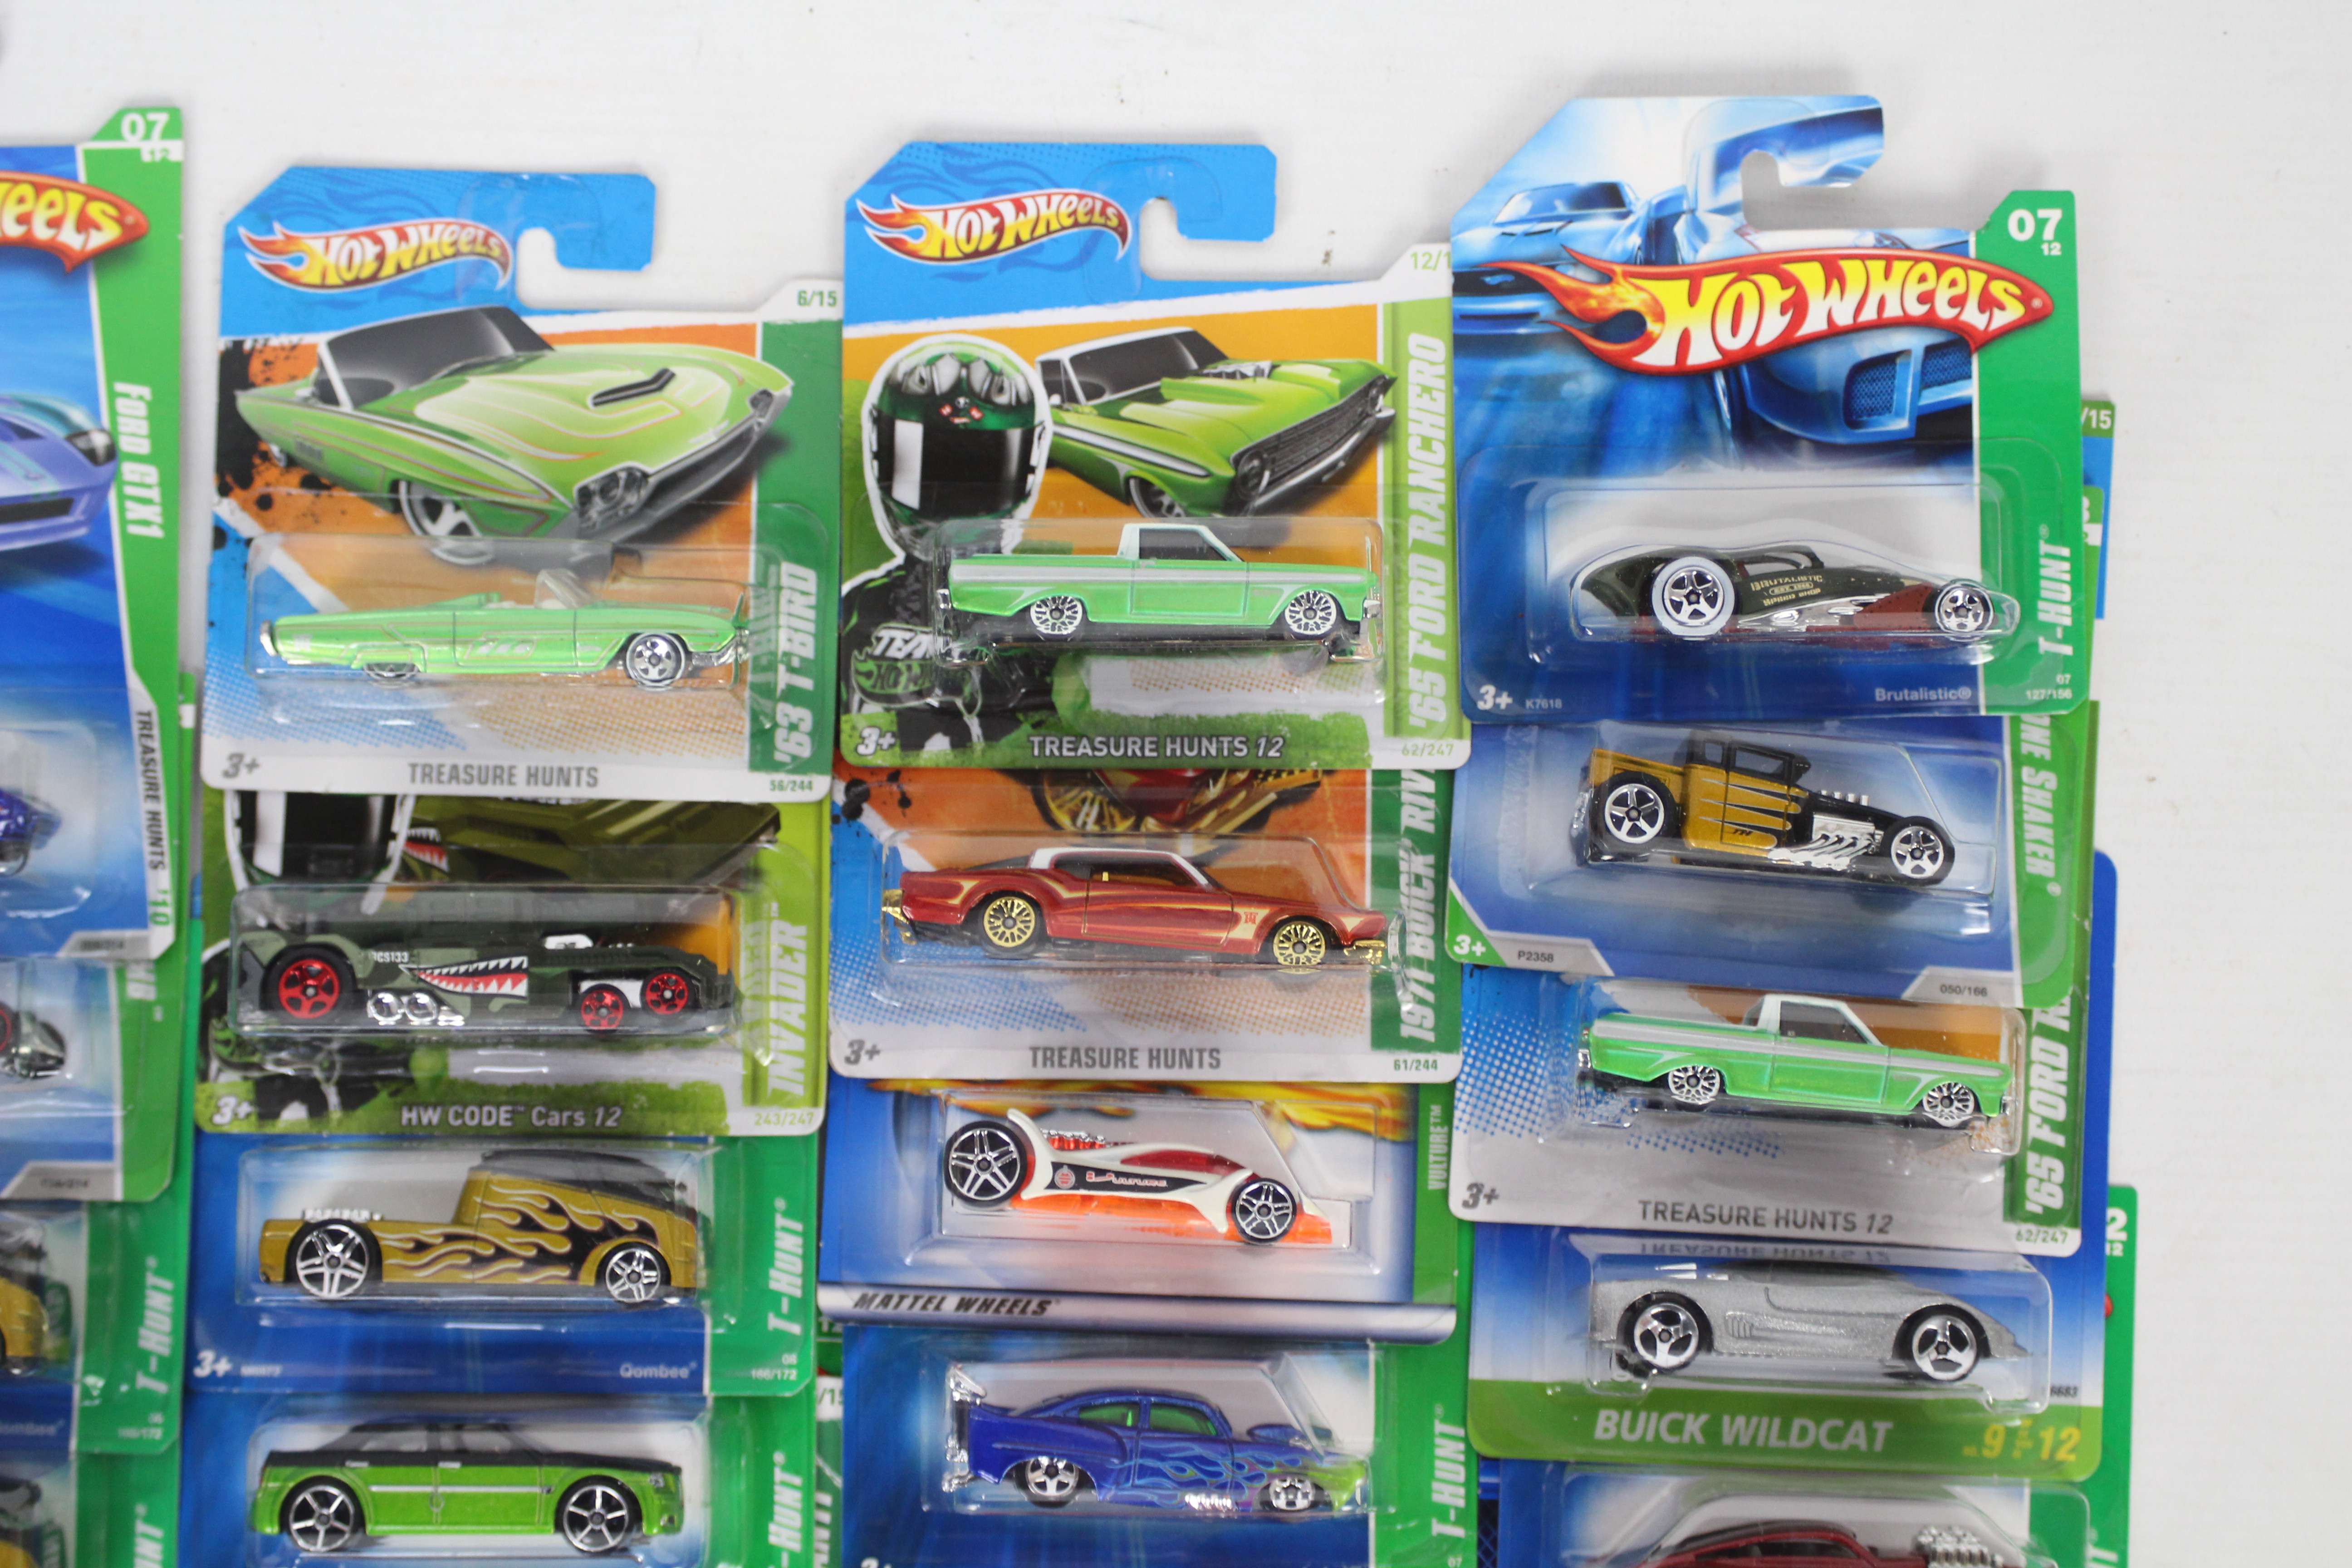 Hot Wheels - Treasure Hunts - 25 x unopened carded models from the sought after Treasure Hunts and - Image 3 of 3